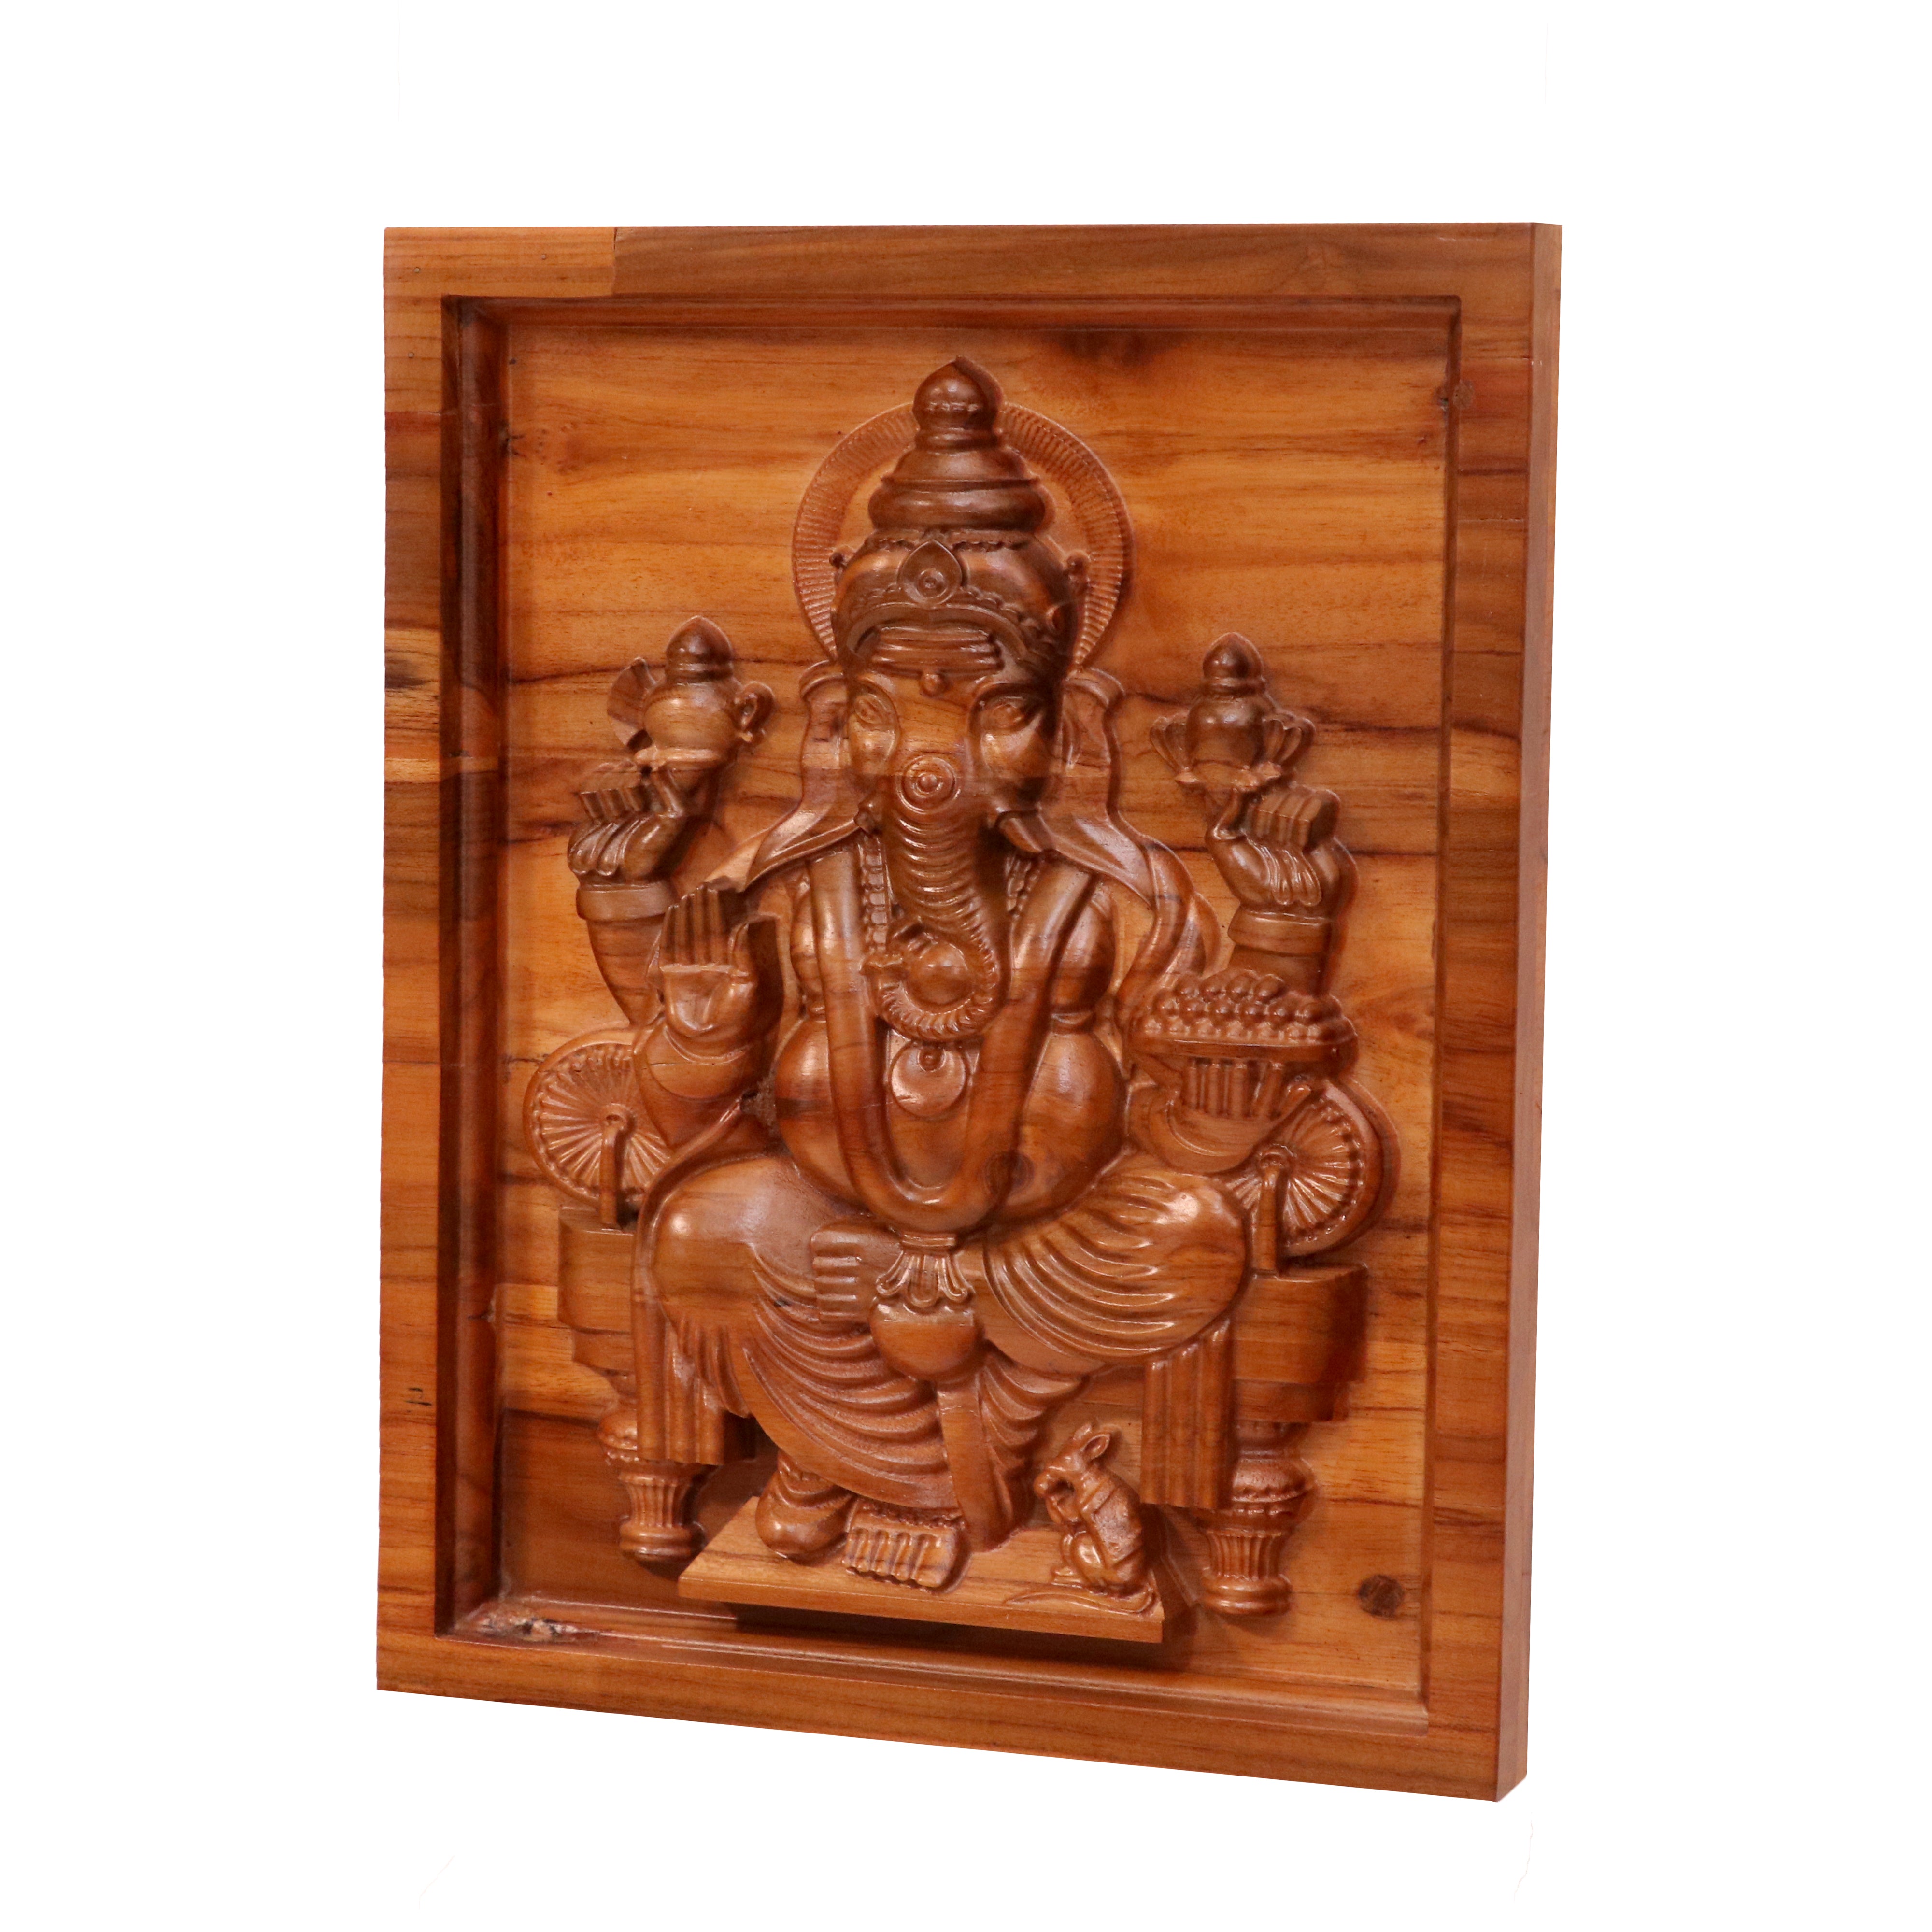 Old Classic Handmade Vintage Wooden Lord Ganesh Wall Frame for Home Wall Decor